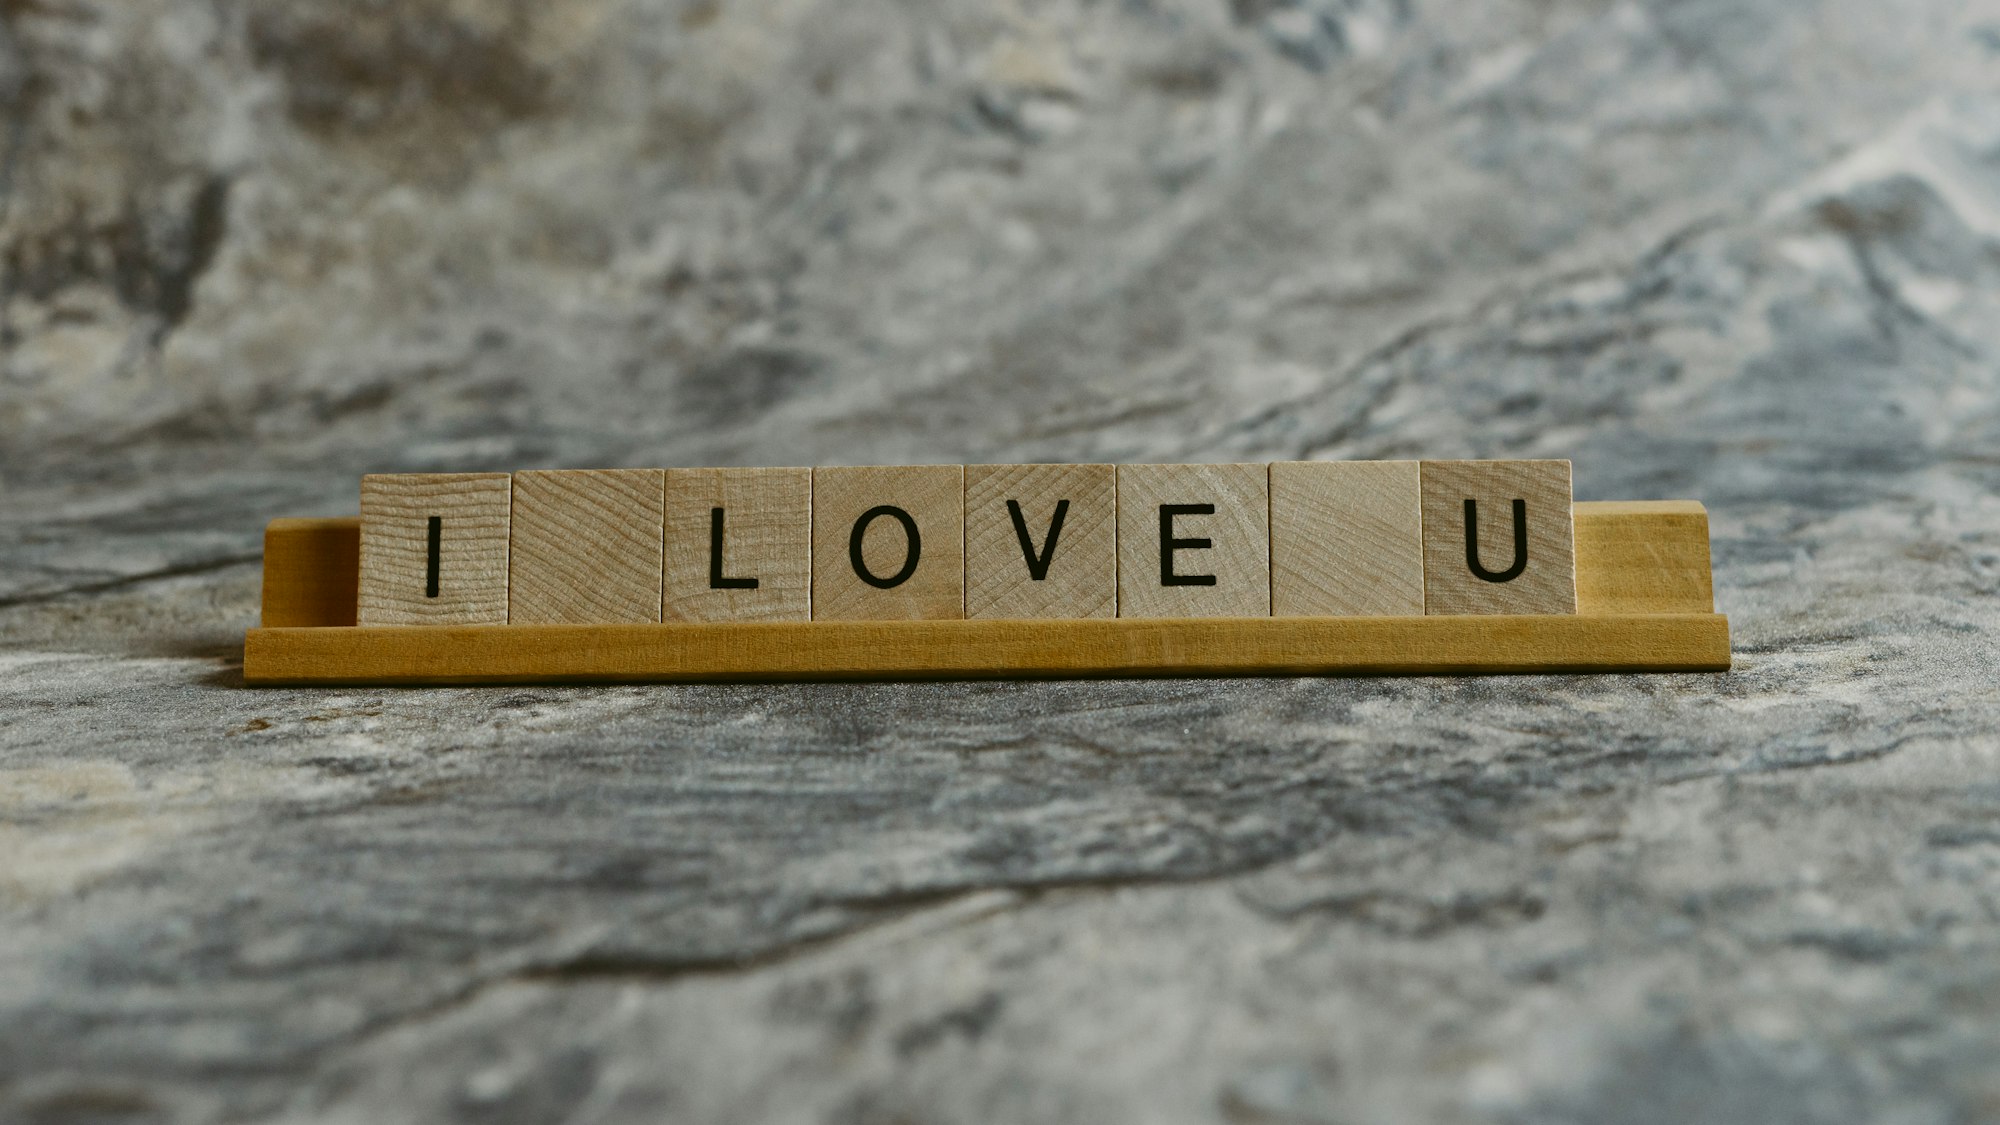 Square pieces with letters from a board game forming the phrase "I love you"